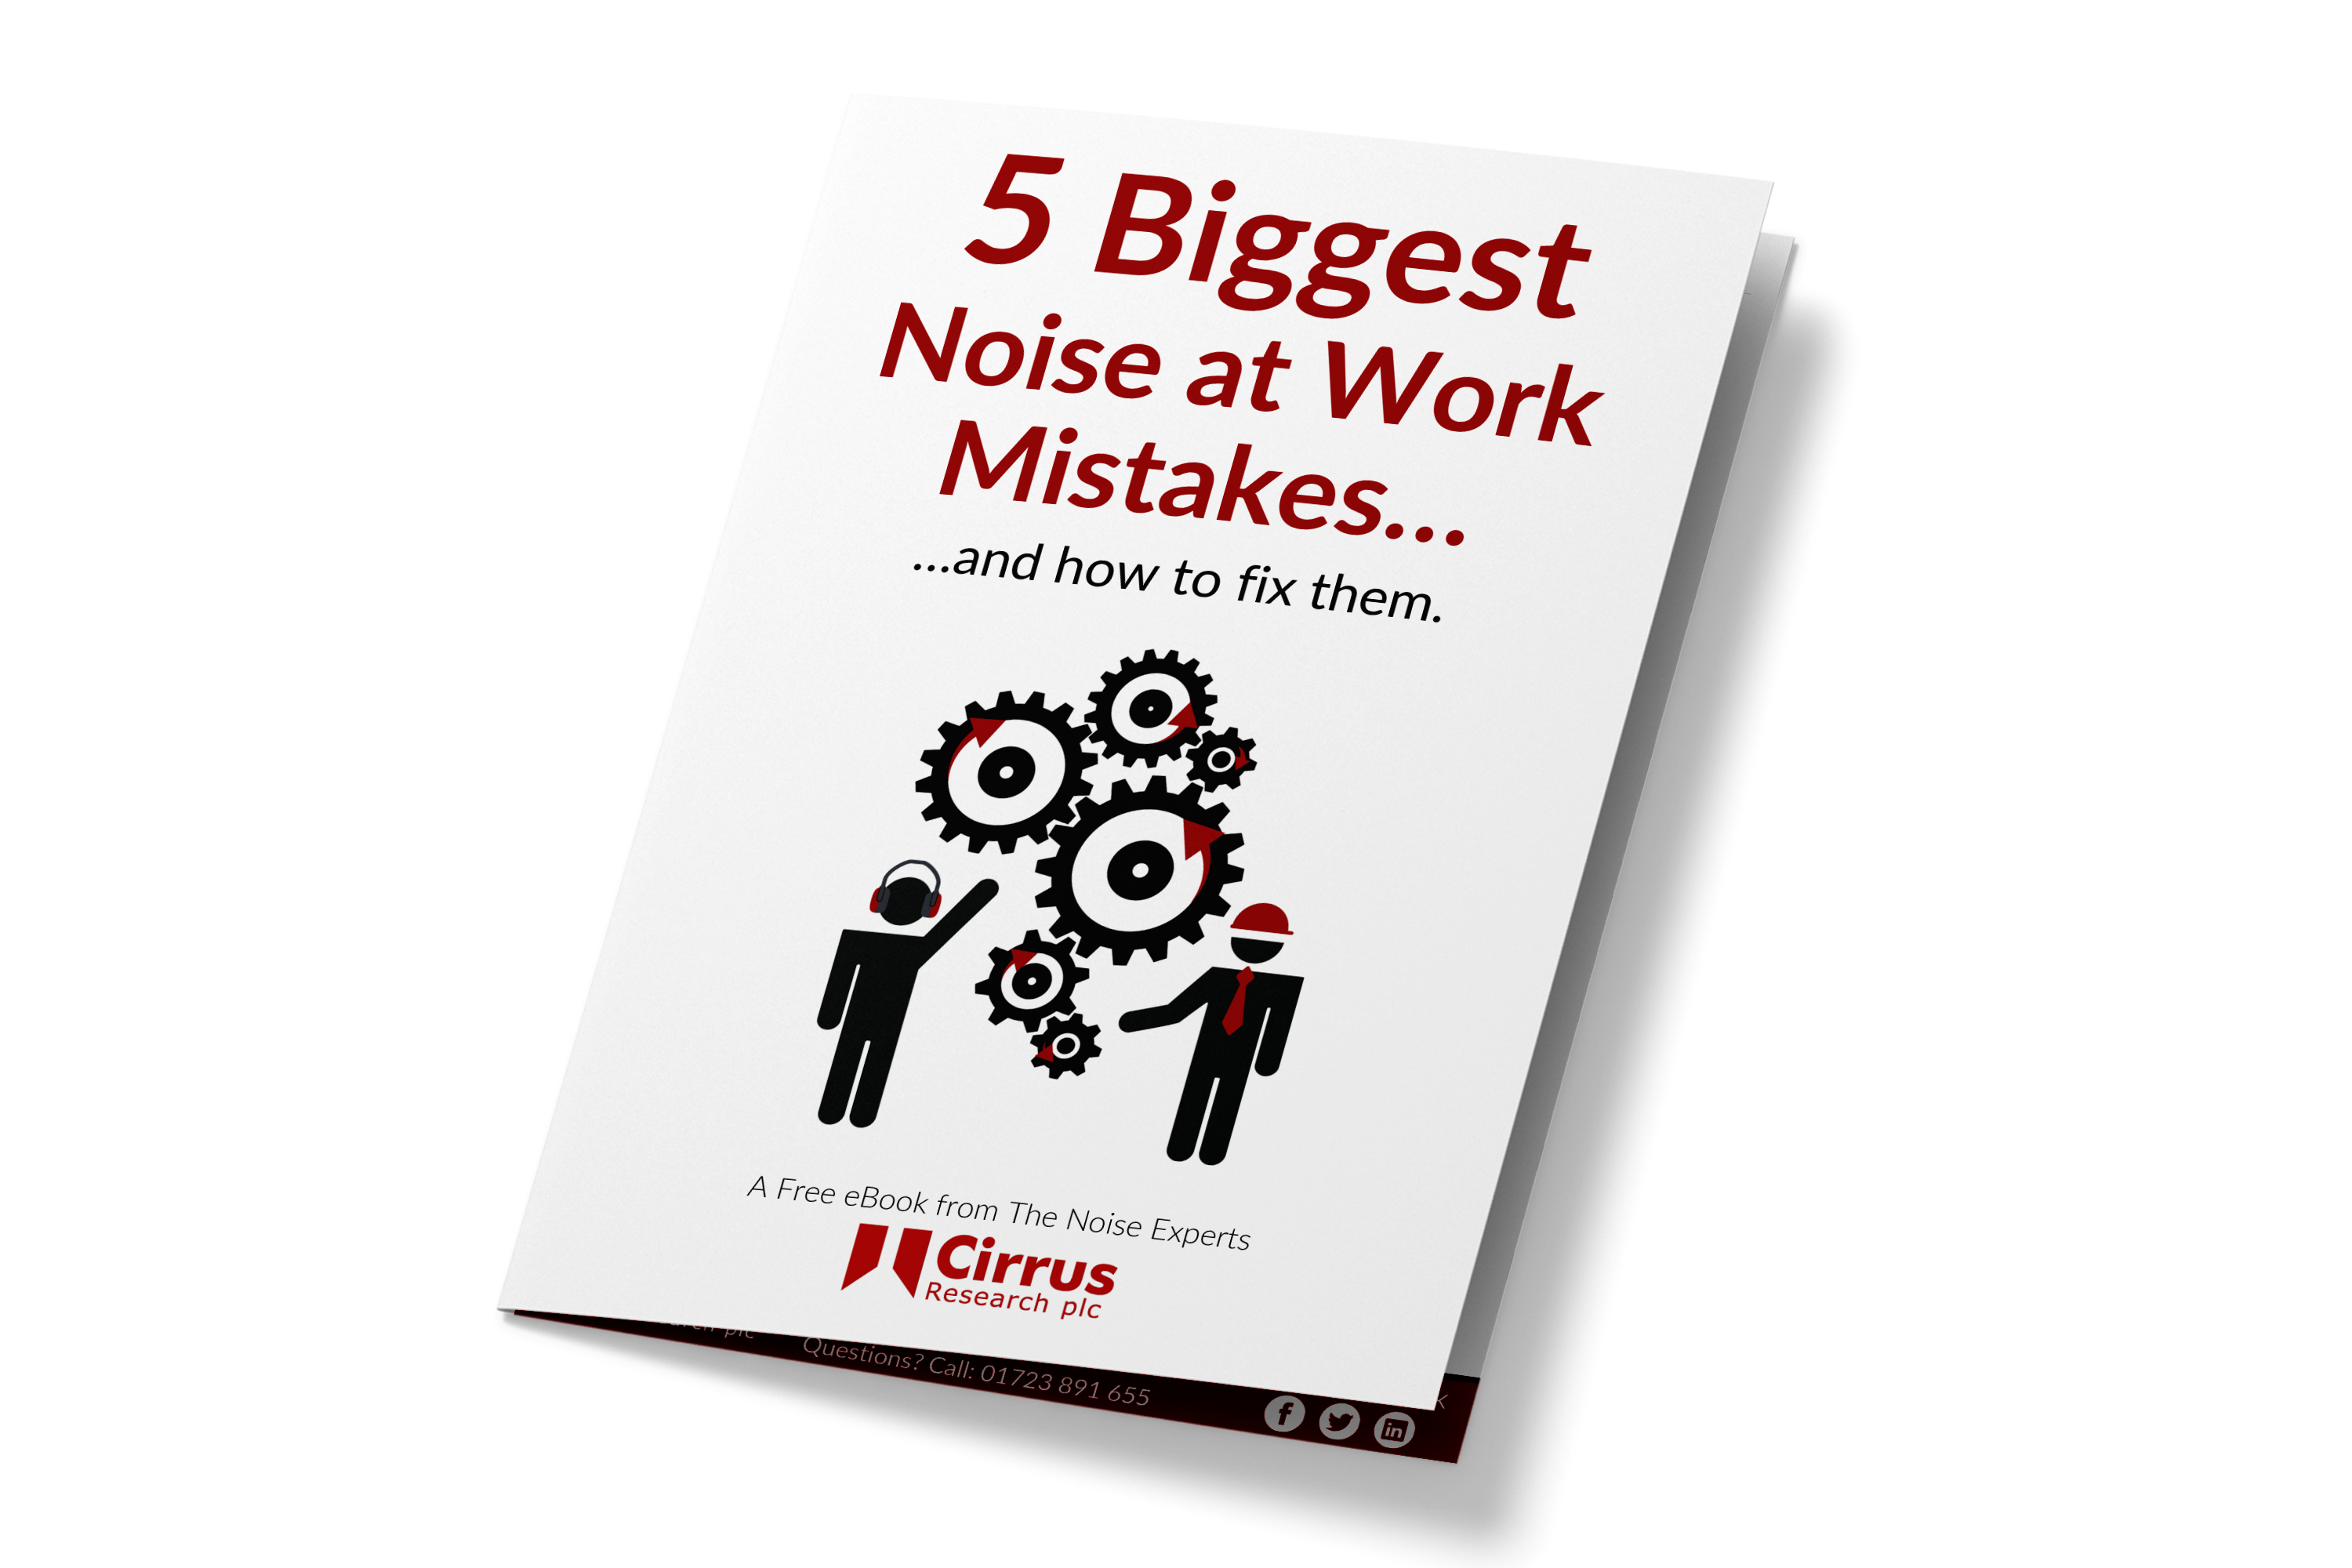 5 Biggest Noise at work Mistakes